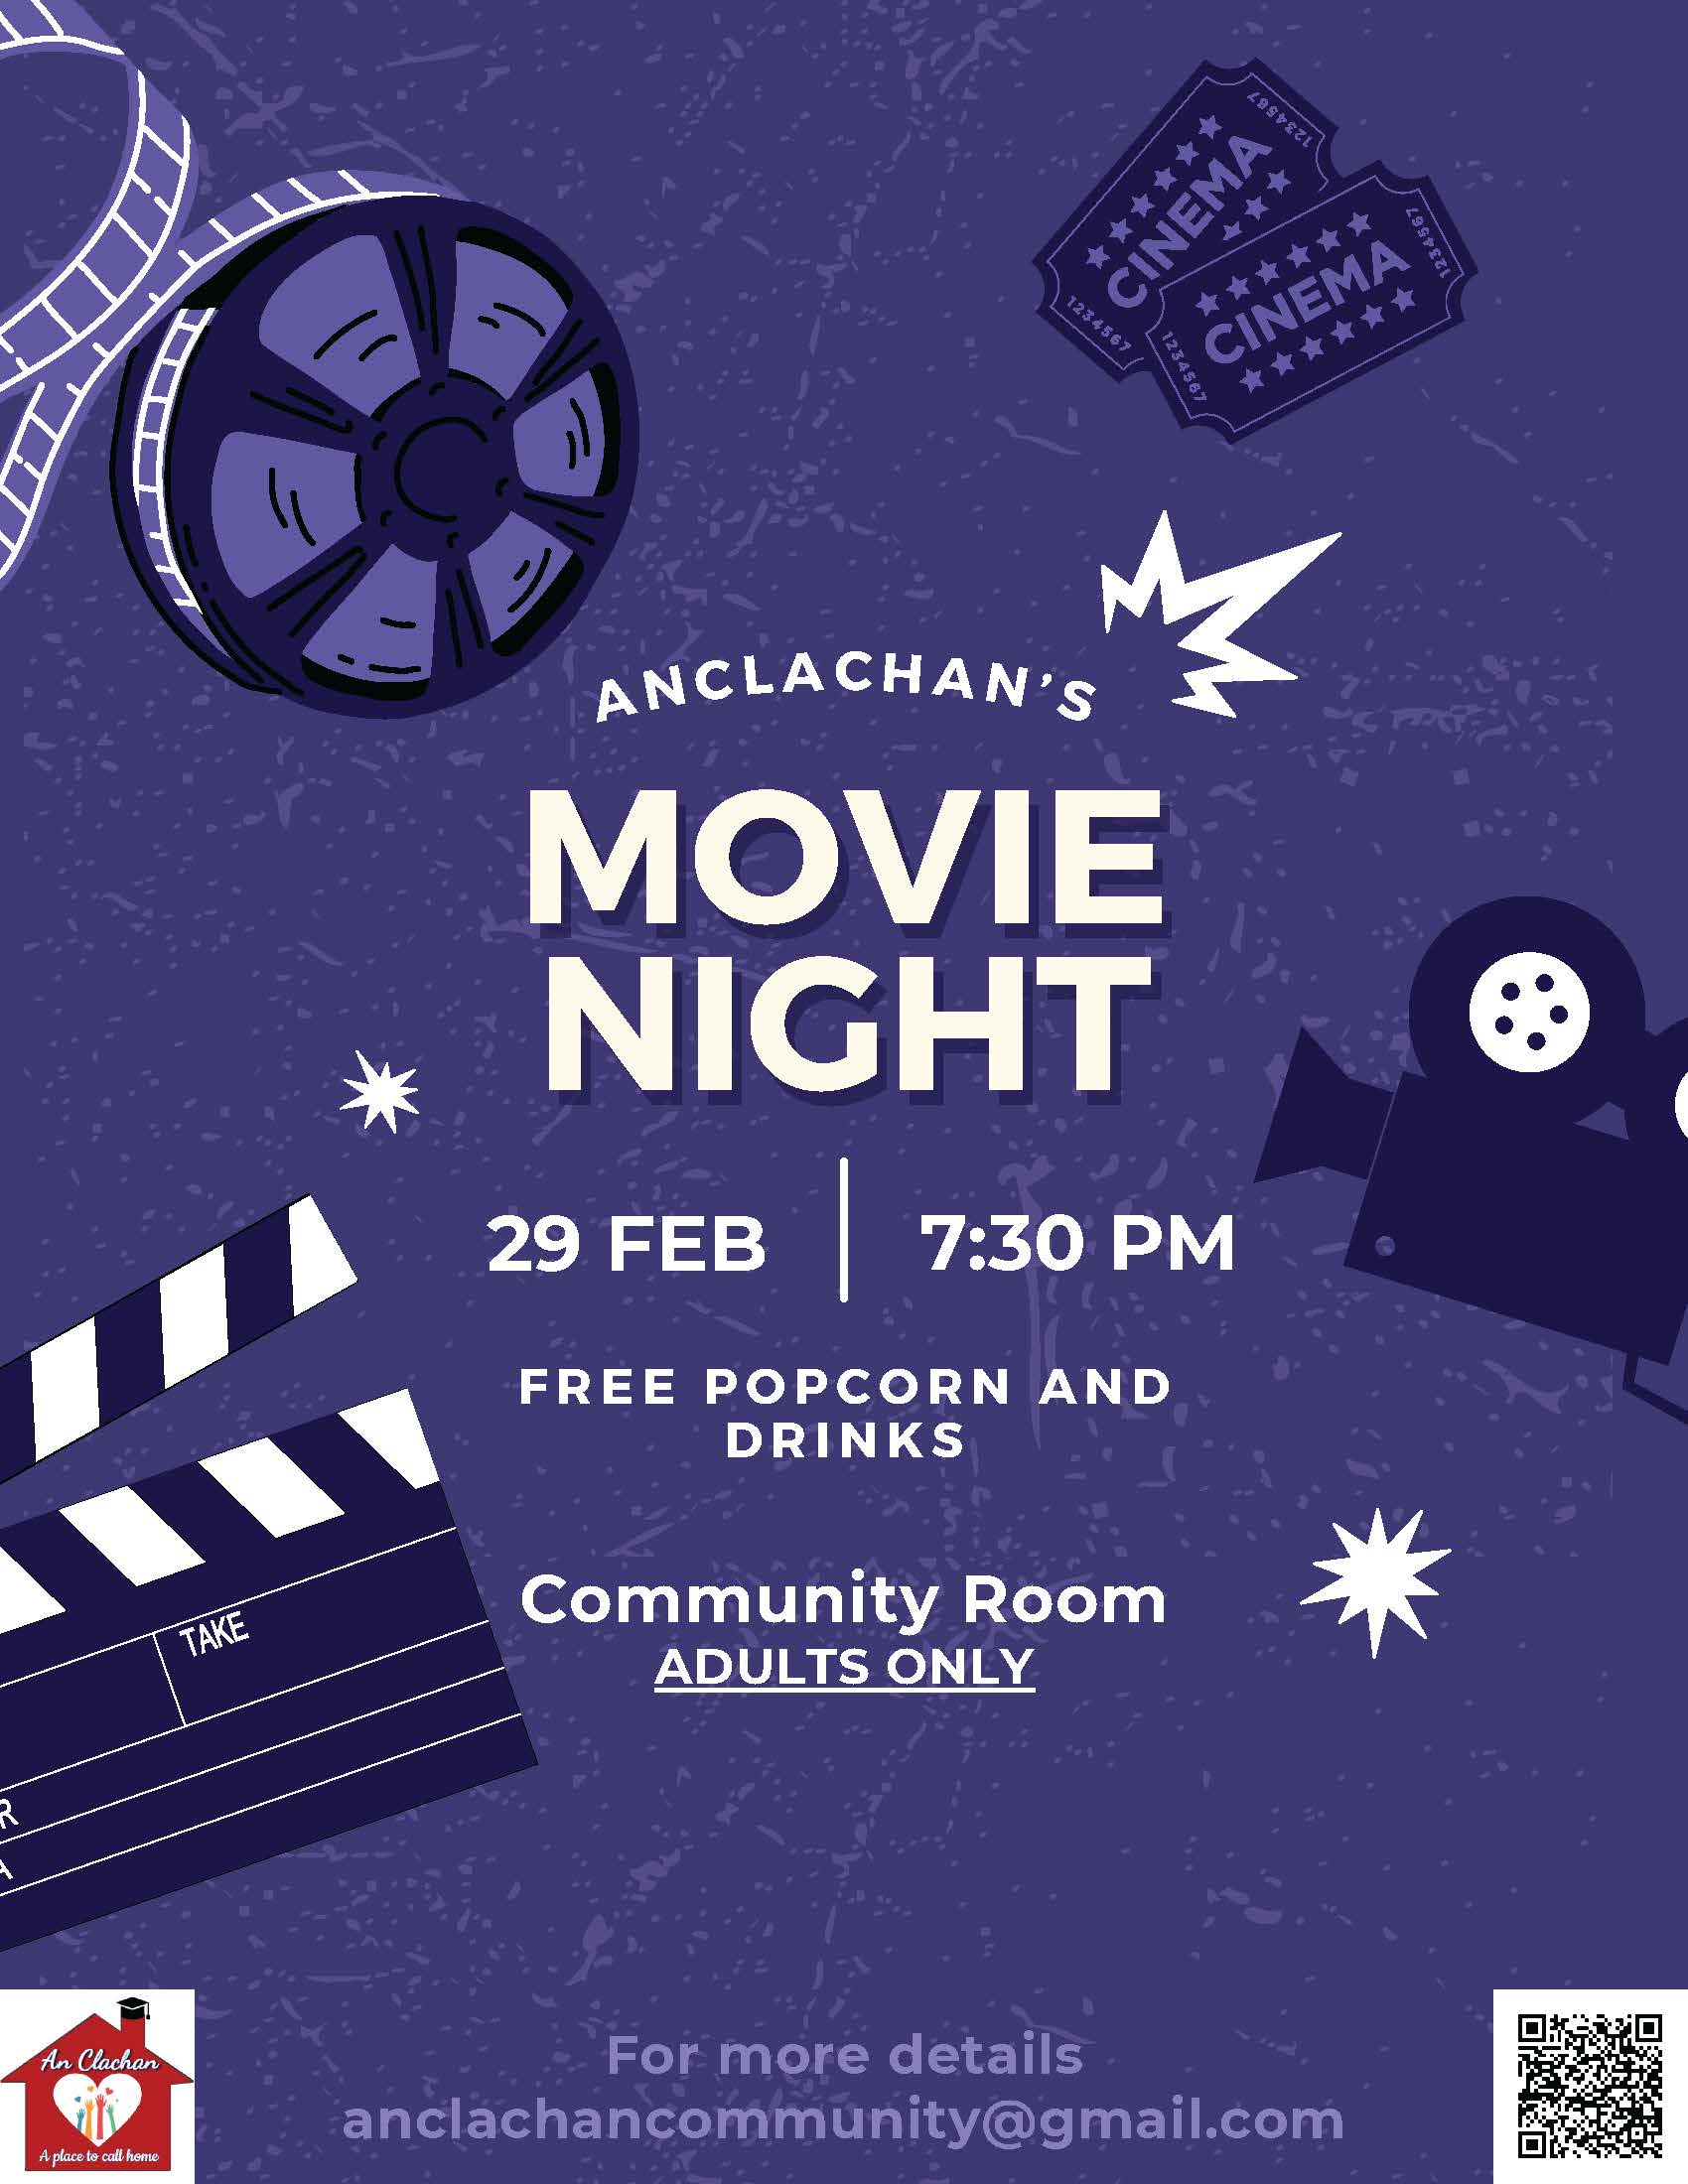 An Clachan's Movie Night. February 29th at 7:30PM. Free Popcorns and Drinks. Community Room. Adults Only. For Questions please email anclachancommunity@gmail.com